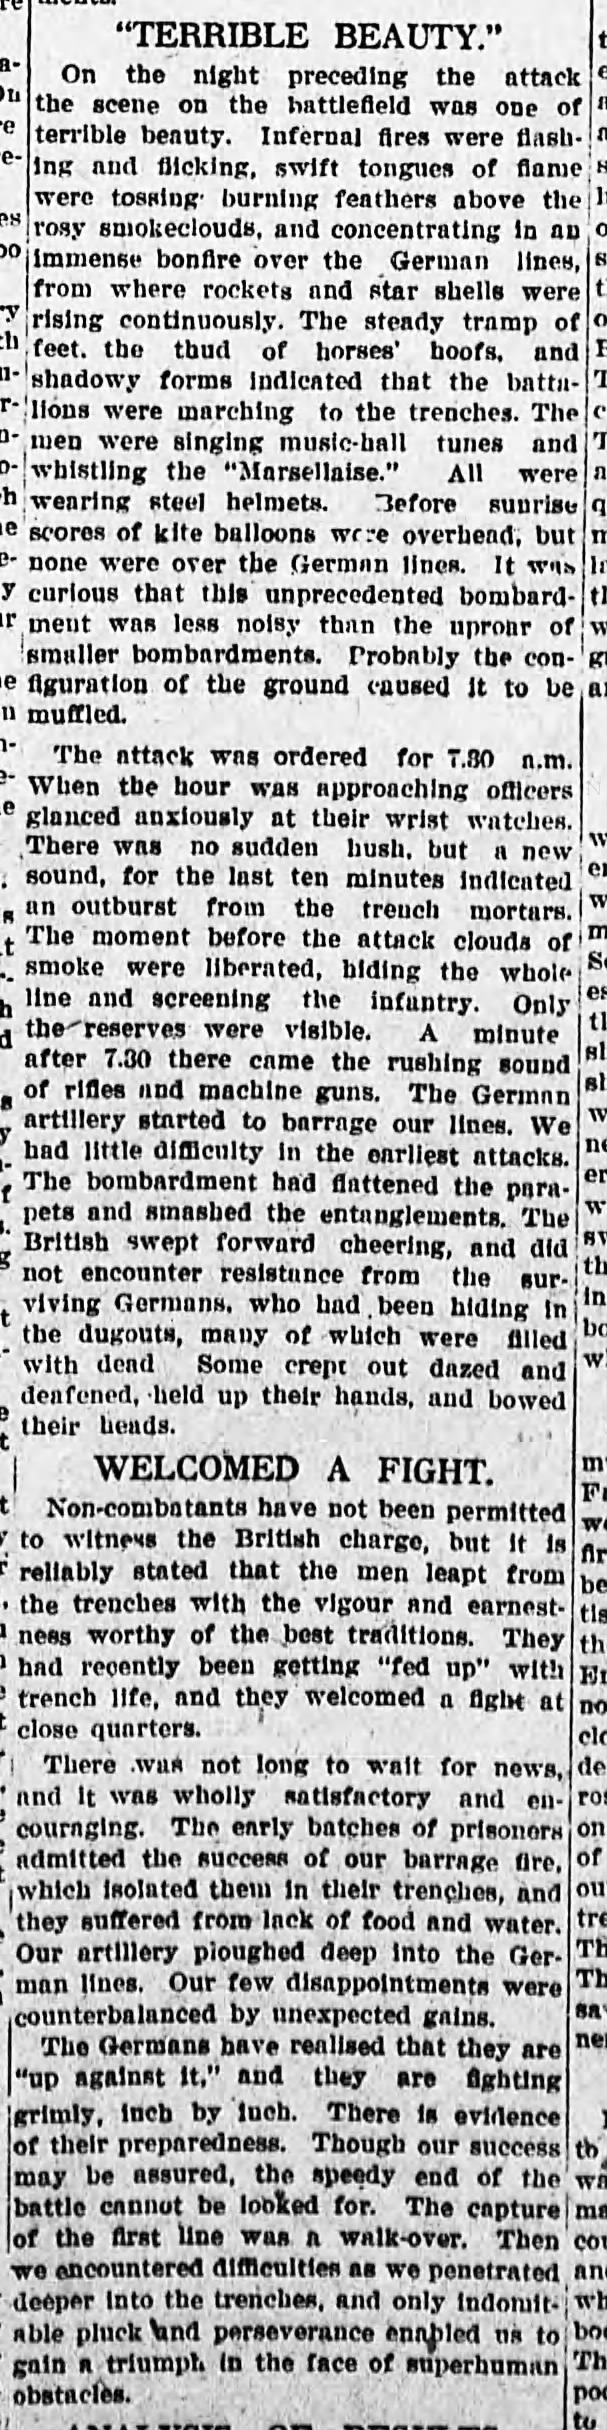 Newspaper correspondent describes the first day of the Battle of the Somme in July 1916